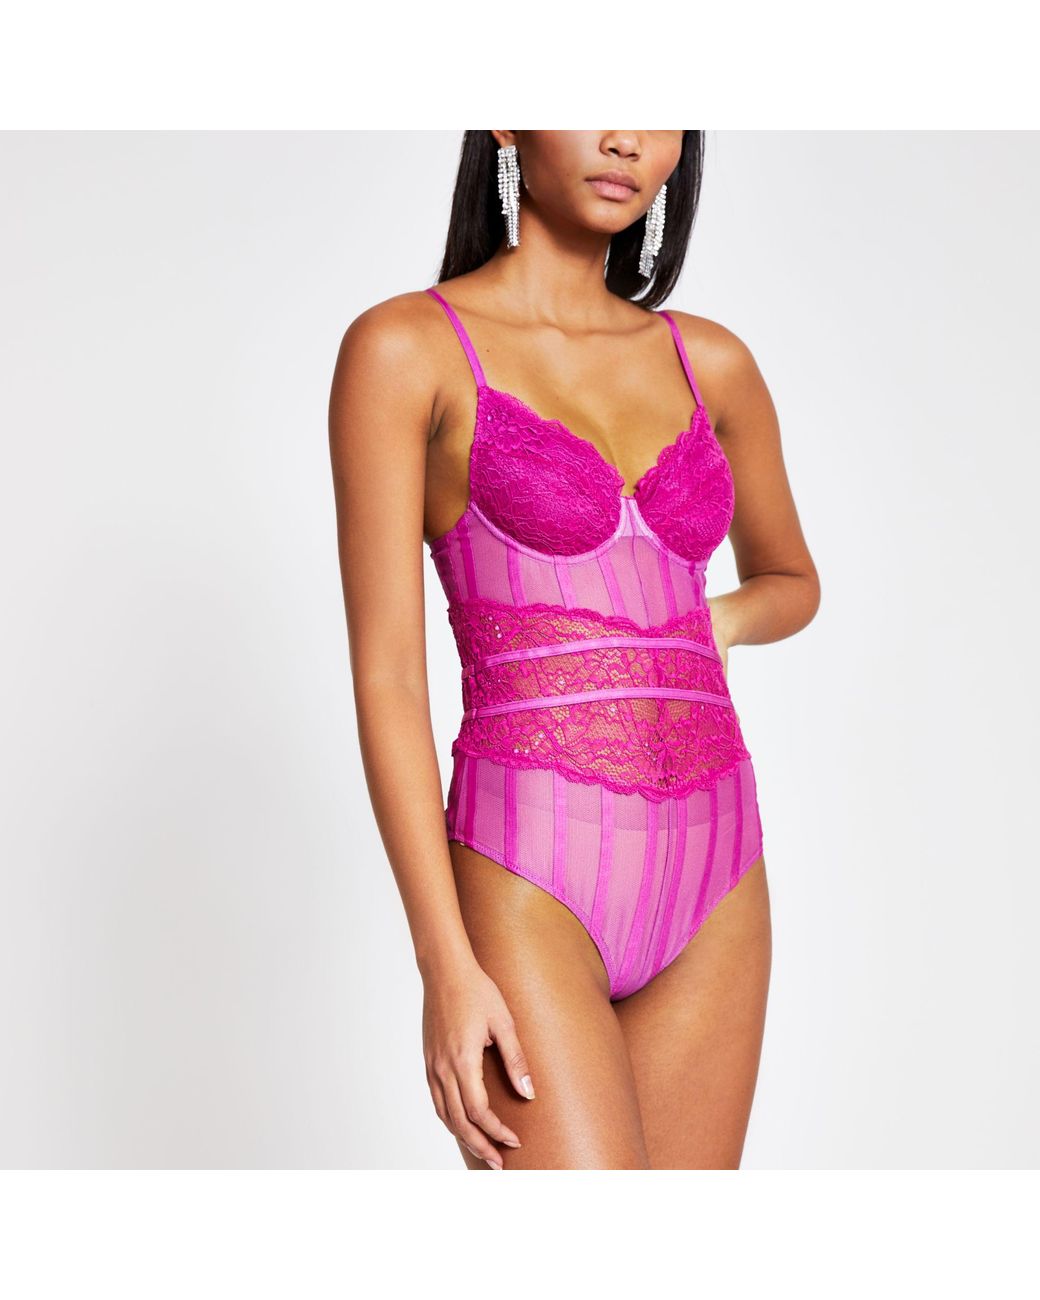 River Island Bright Pink Lace Corset Bodysuit Top | Lyst